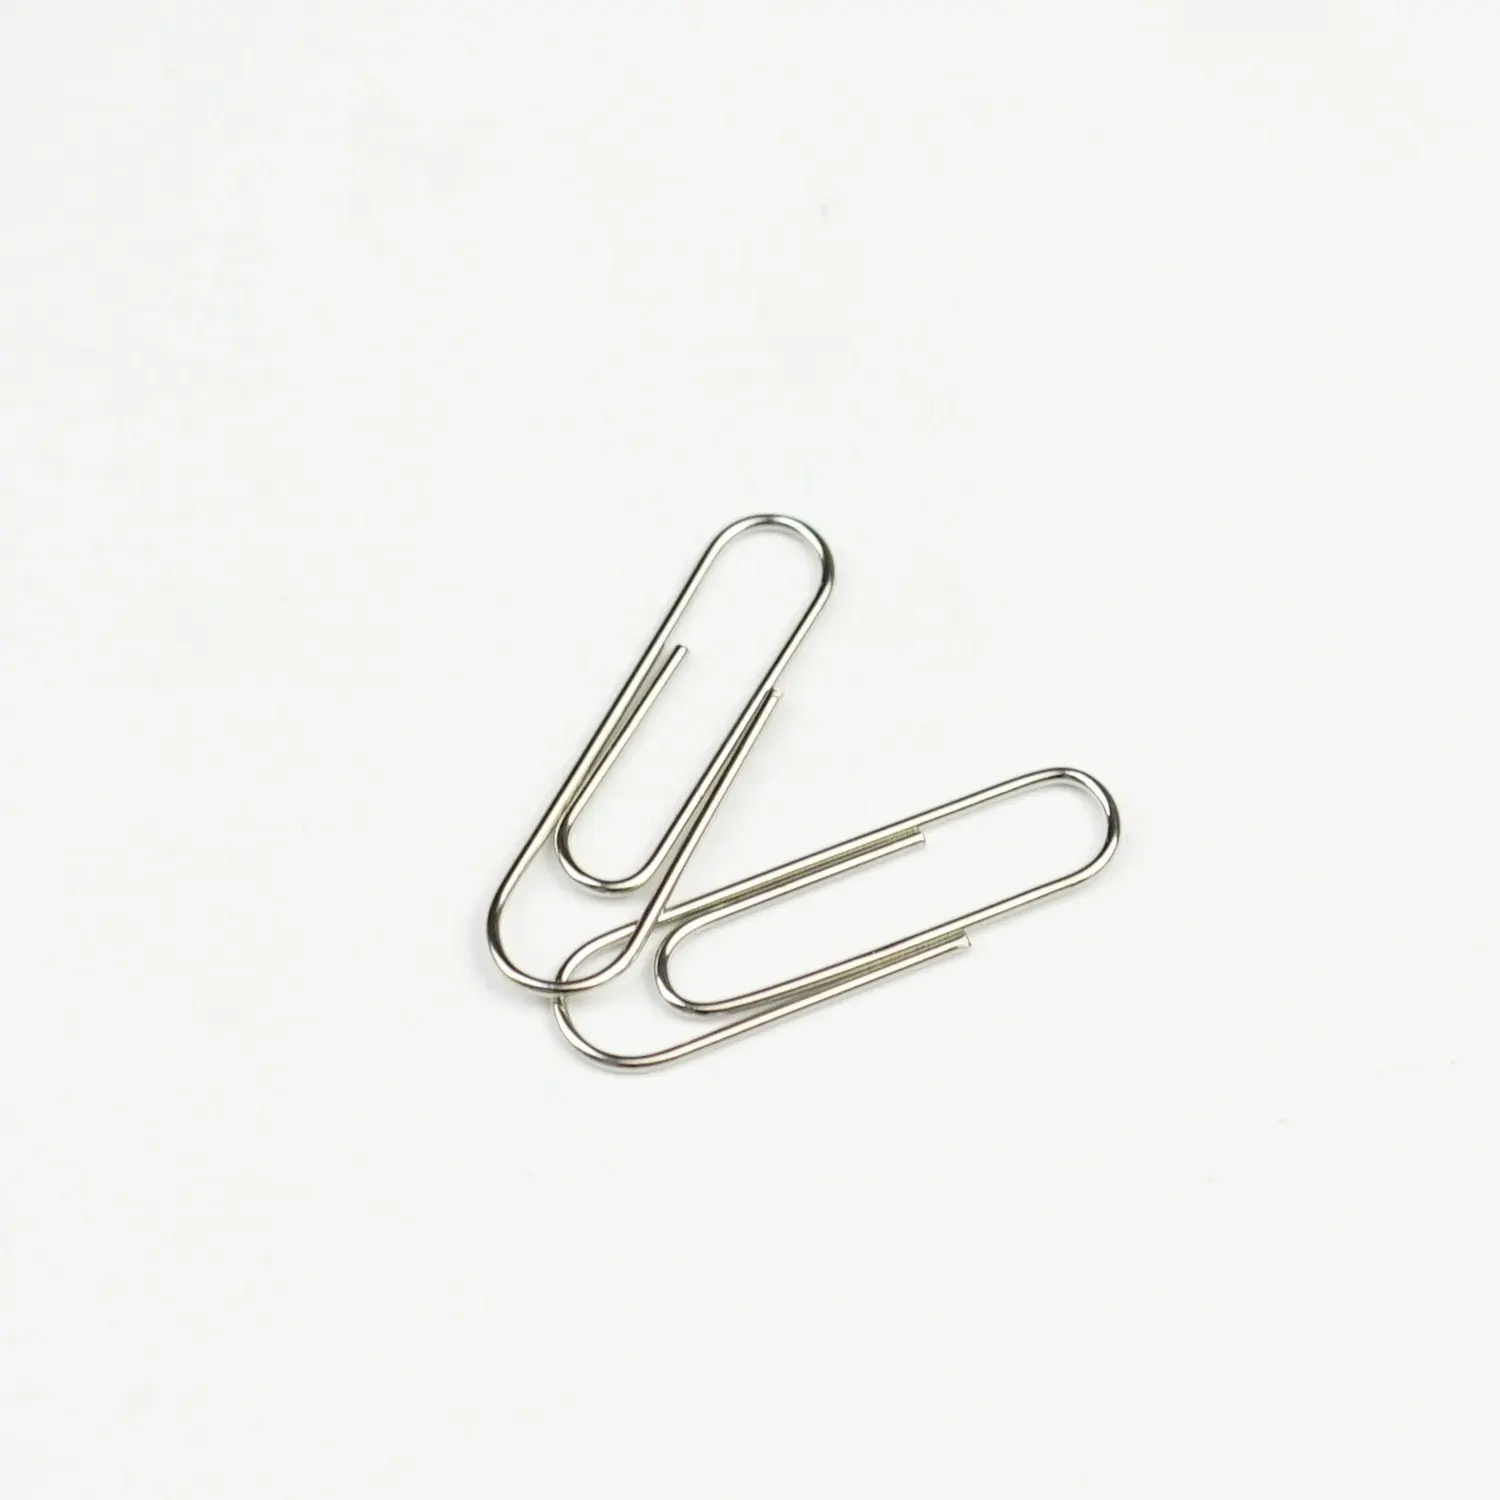 Hot sell Product Paper Clip Custom Clips For Paper